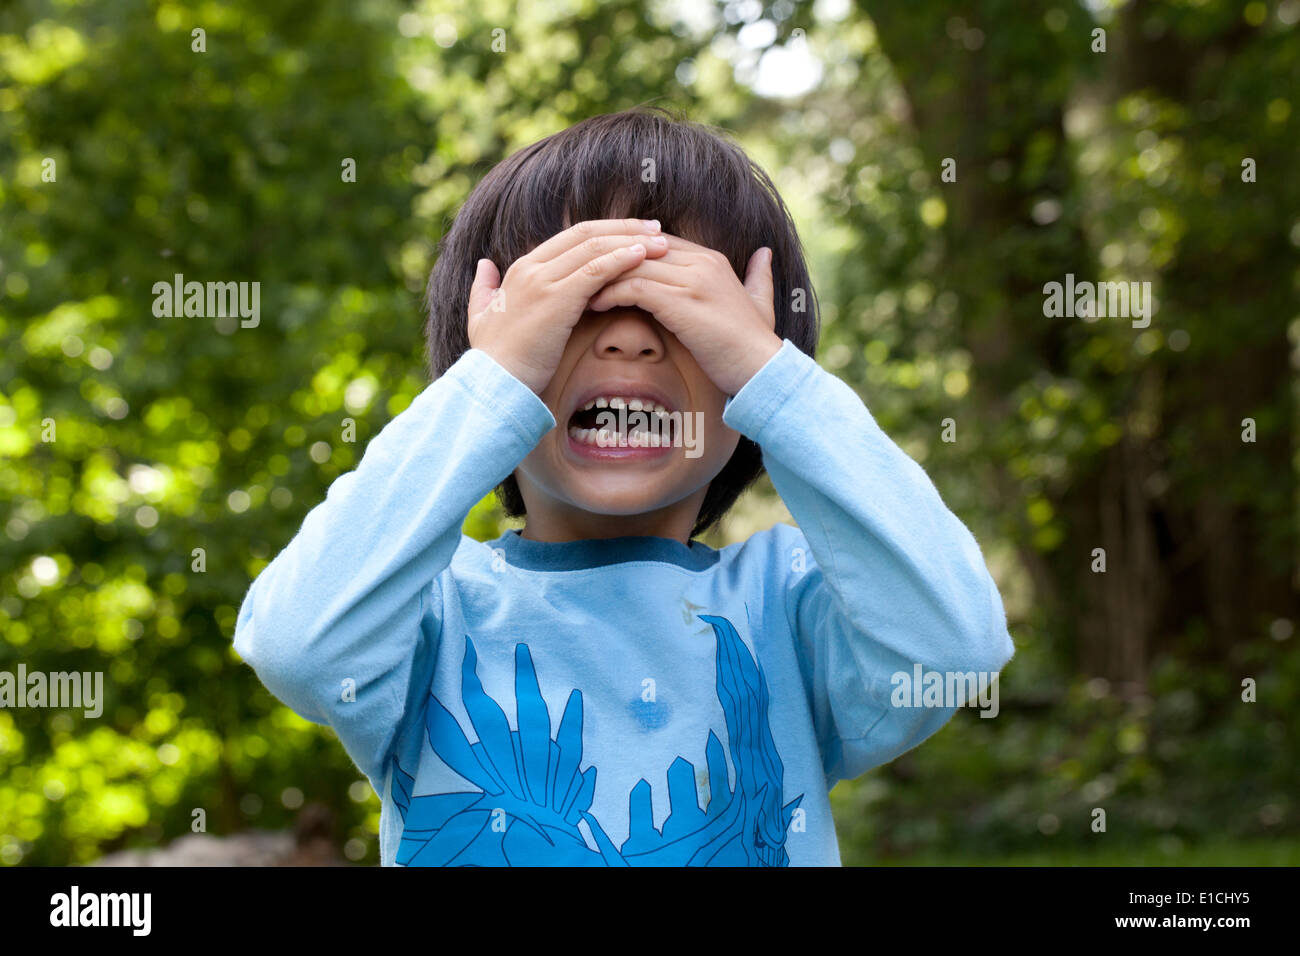 Boy, aged 5, crying with hands over face Stock Photo